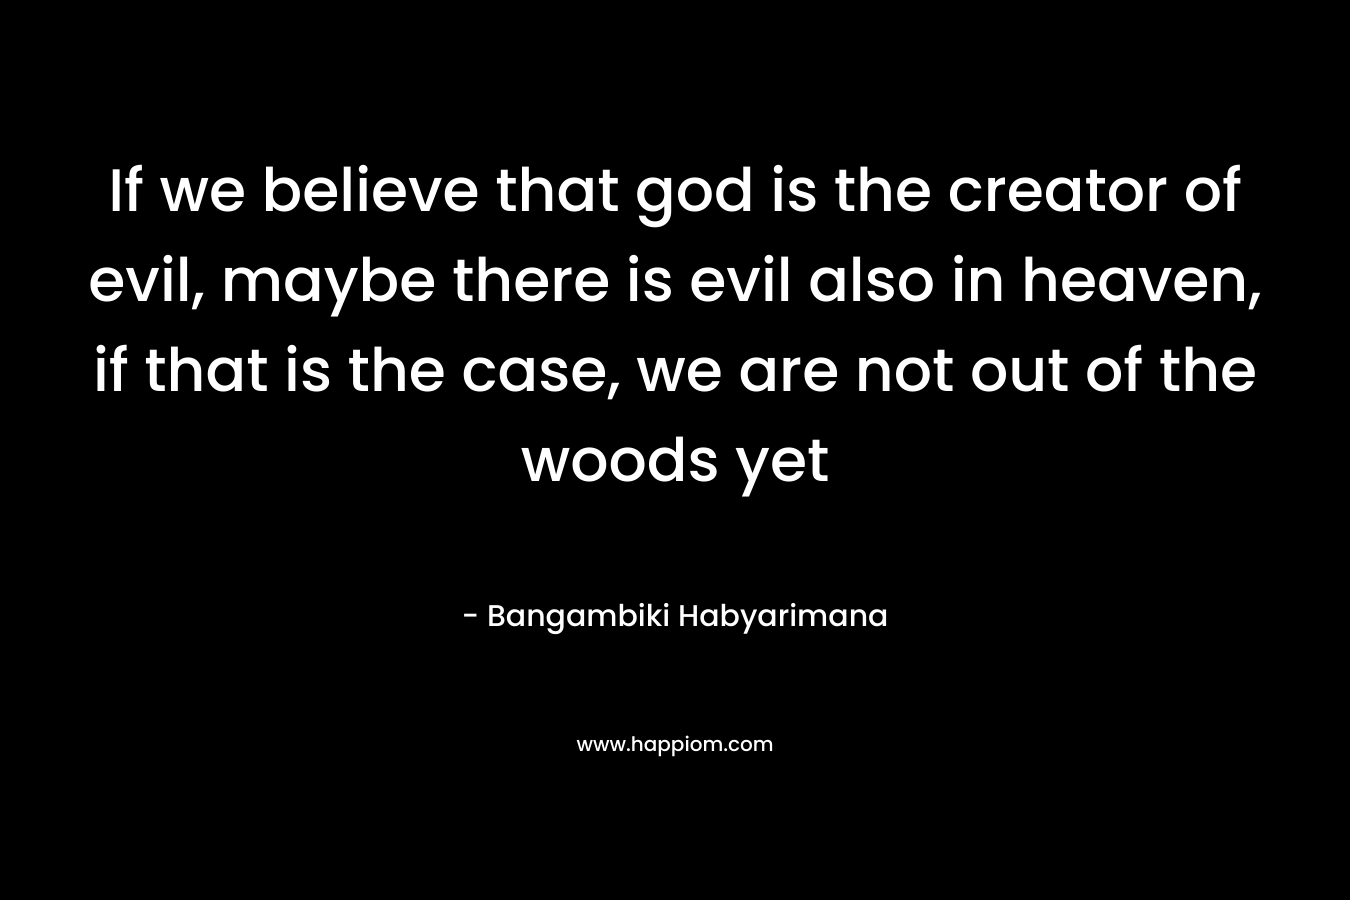 If we believe that god is the creator of evil, maybe there is evil also in heaven, if that is the case, we are not out of the woods yet